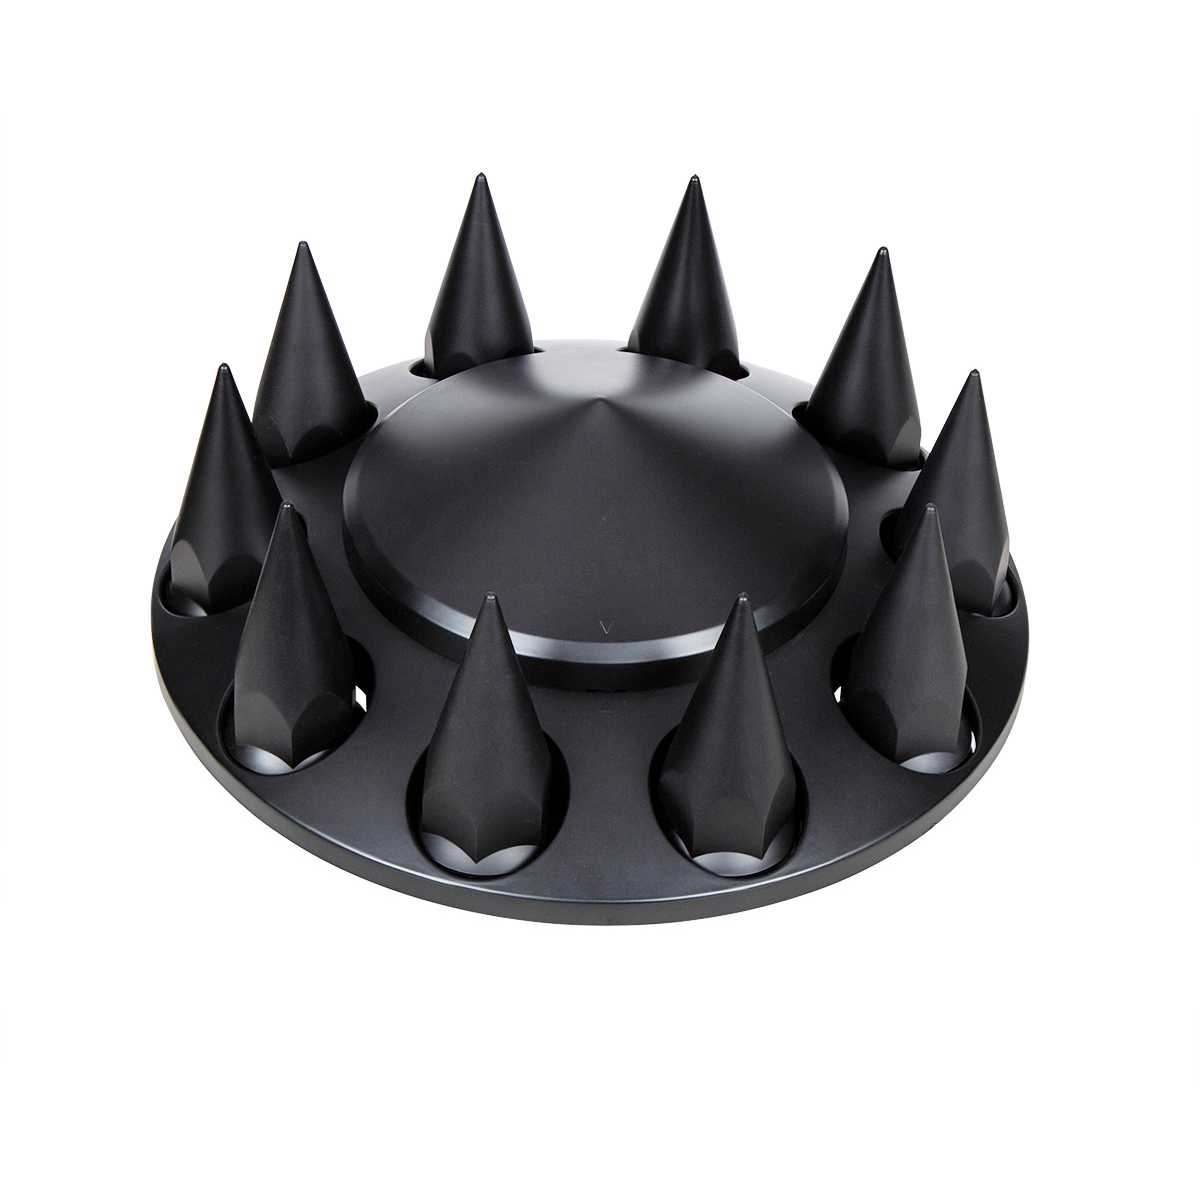 Matte Black Pointed Axle Cover Combo Kit w/ 33mm Spike Nut Covers & Tool 